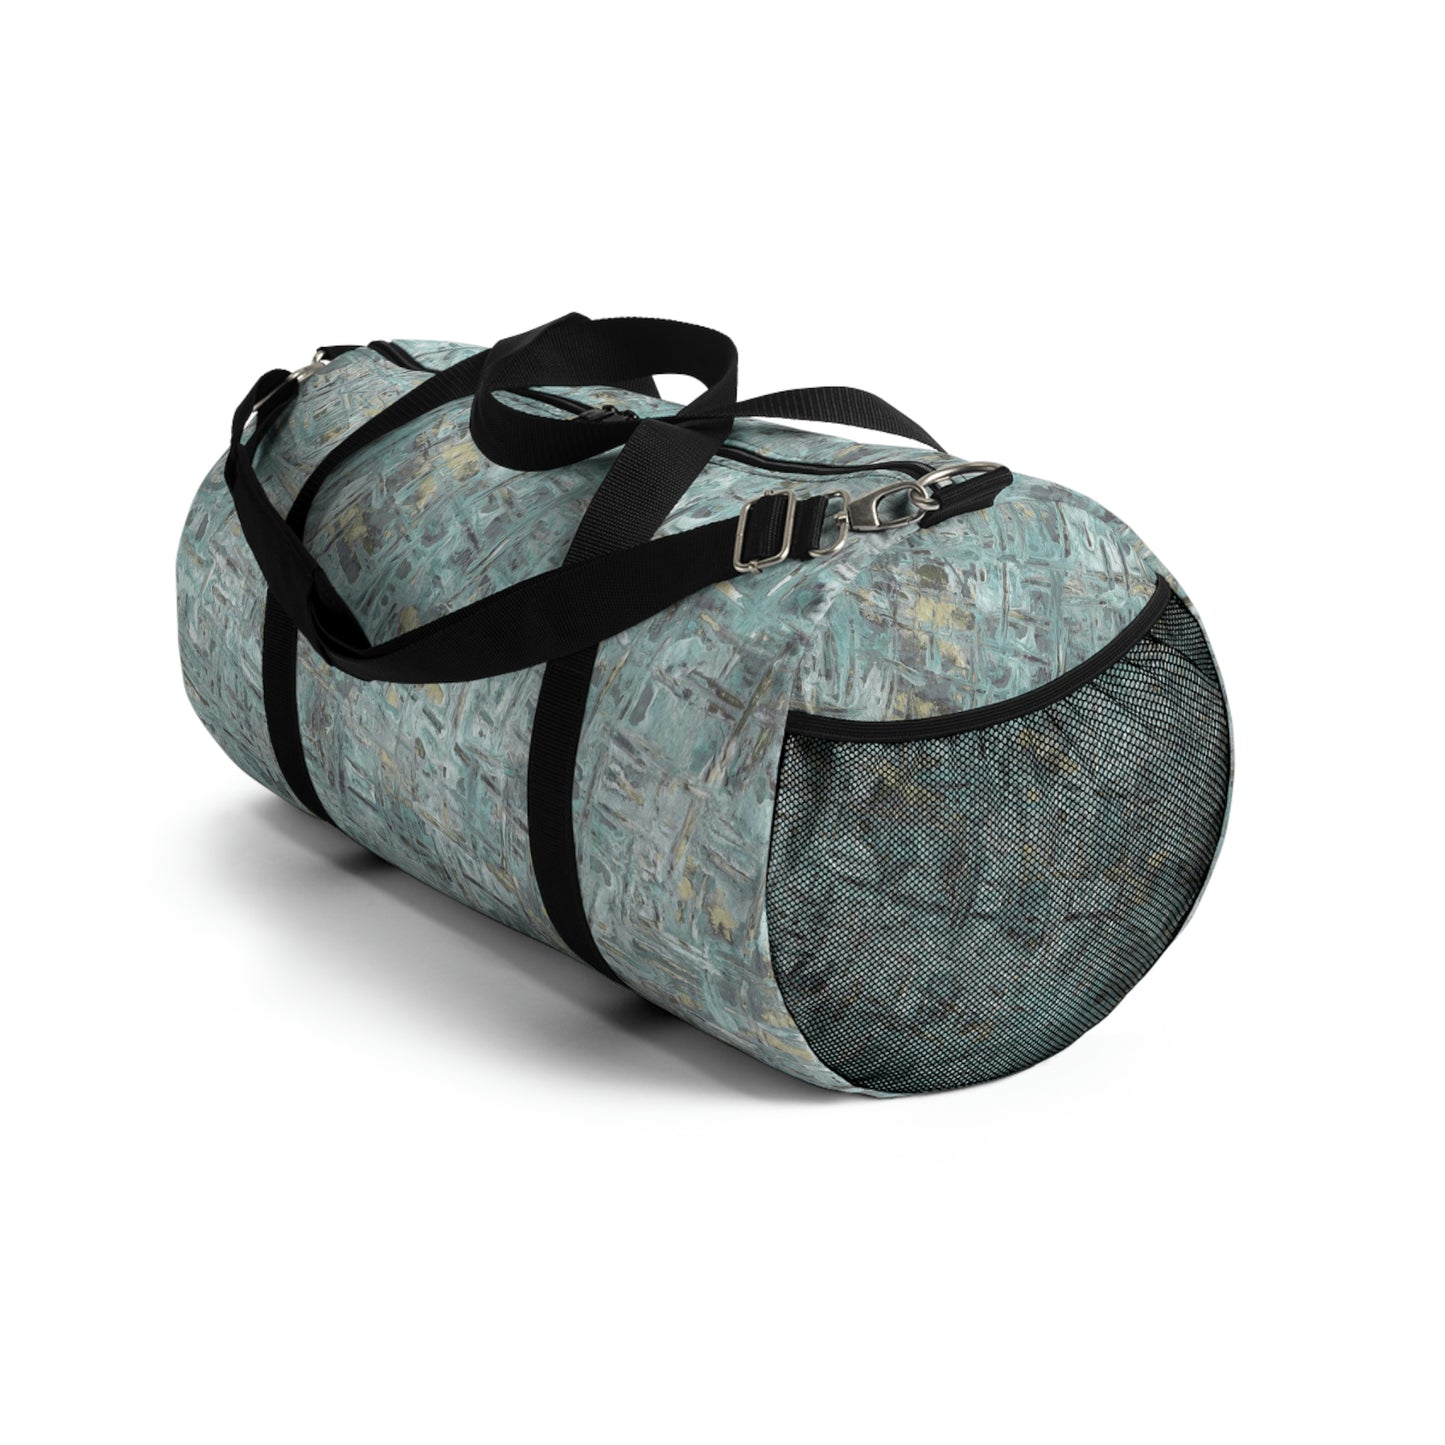 Abstract Duffle Bag, Weekender Duffle Bag, Carry- on Travel Overnight Canvas Duffel Bag